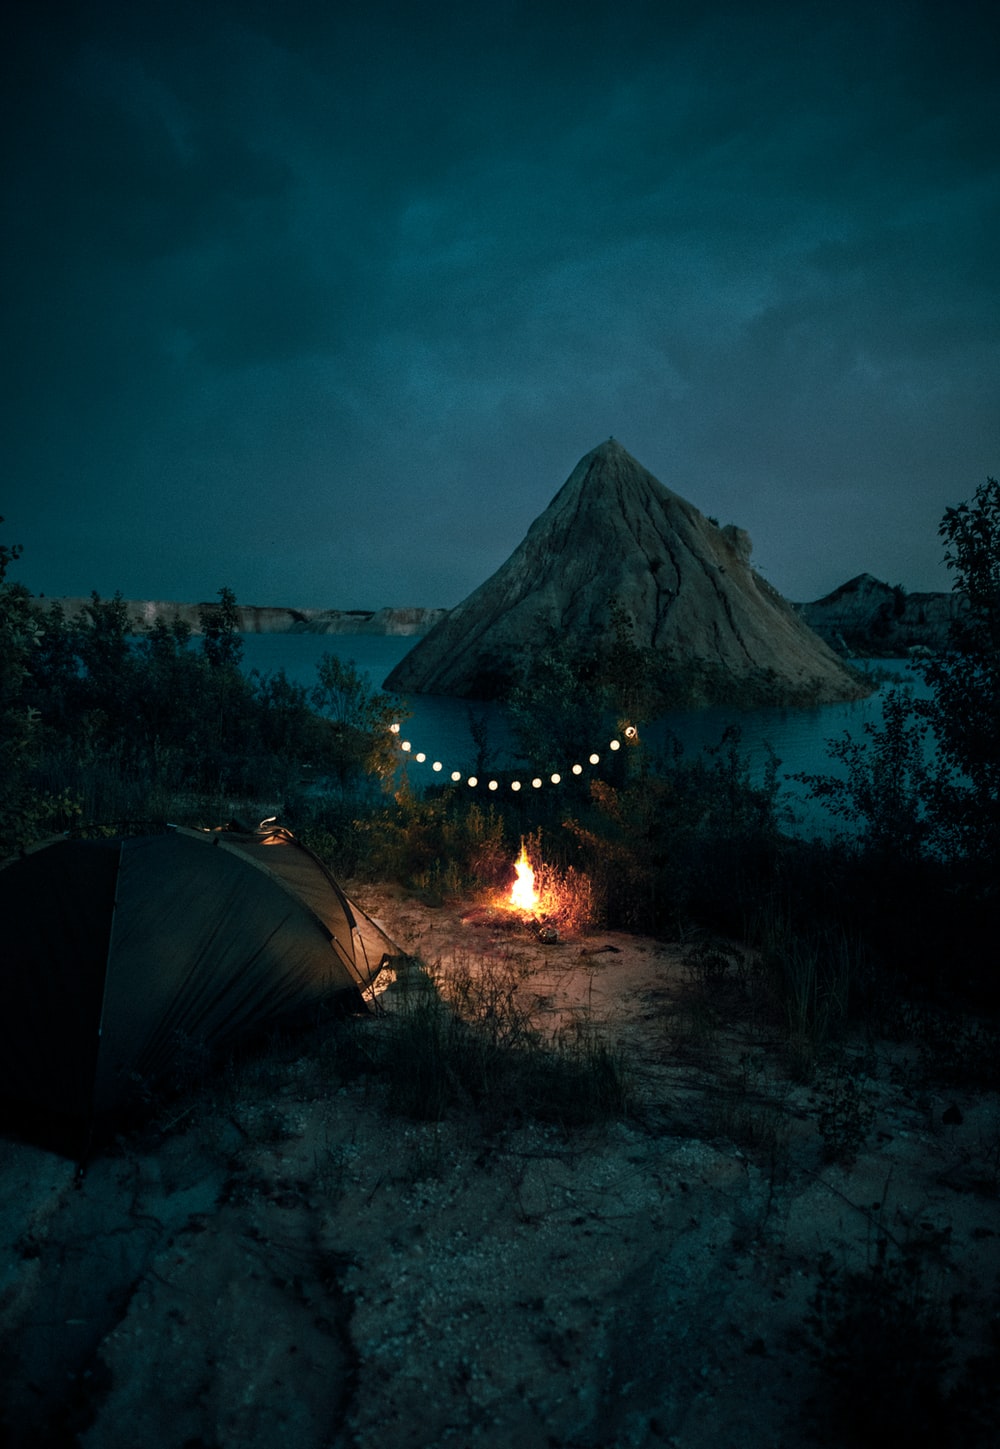 Bonfire Near Tent And Mountain During Night Time Photo